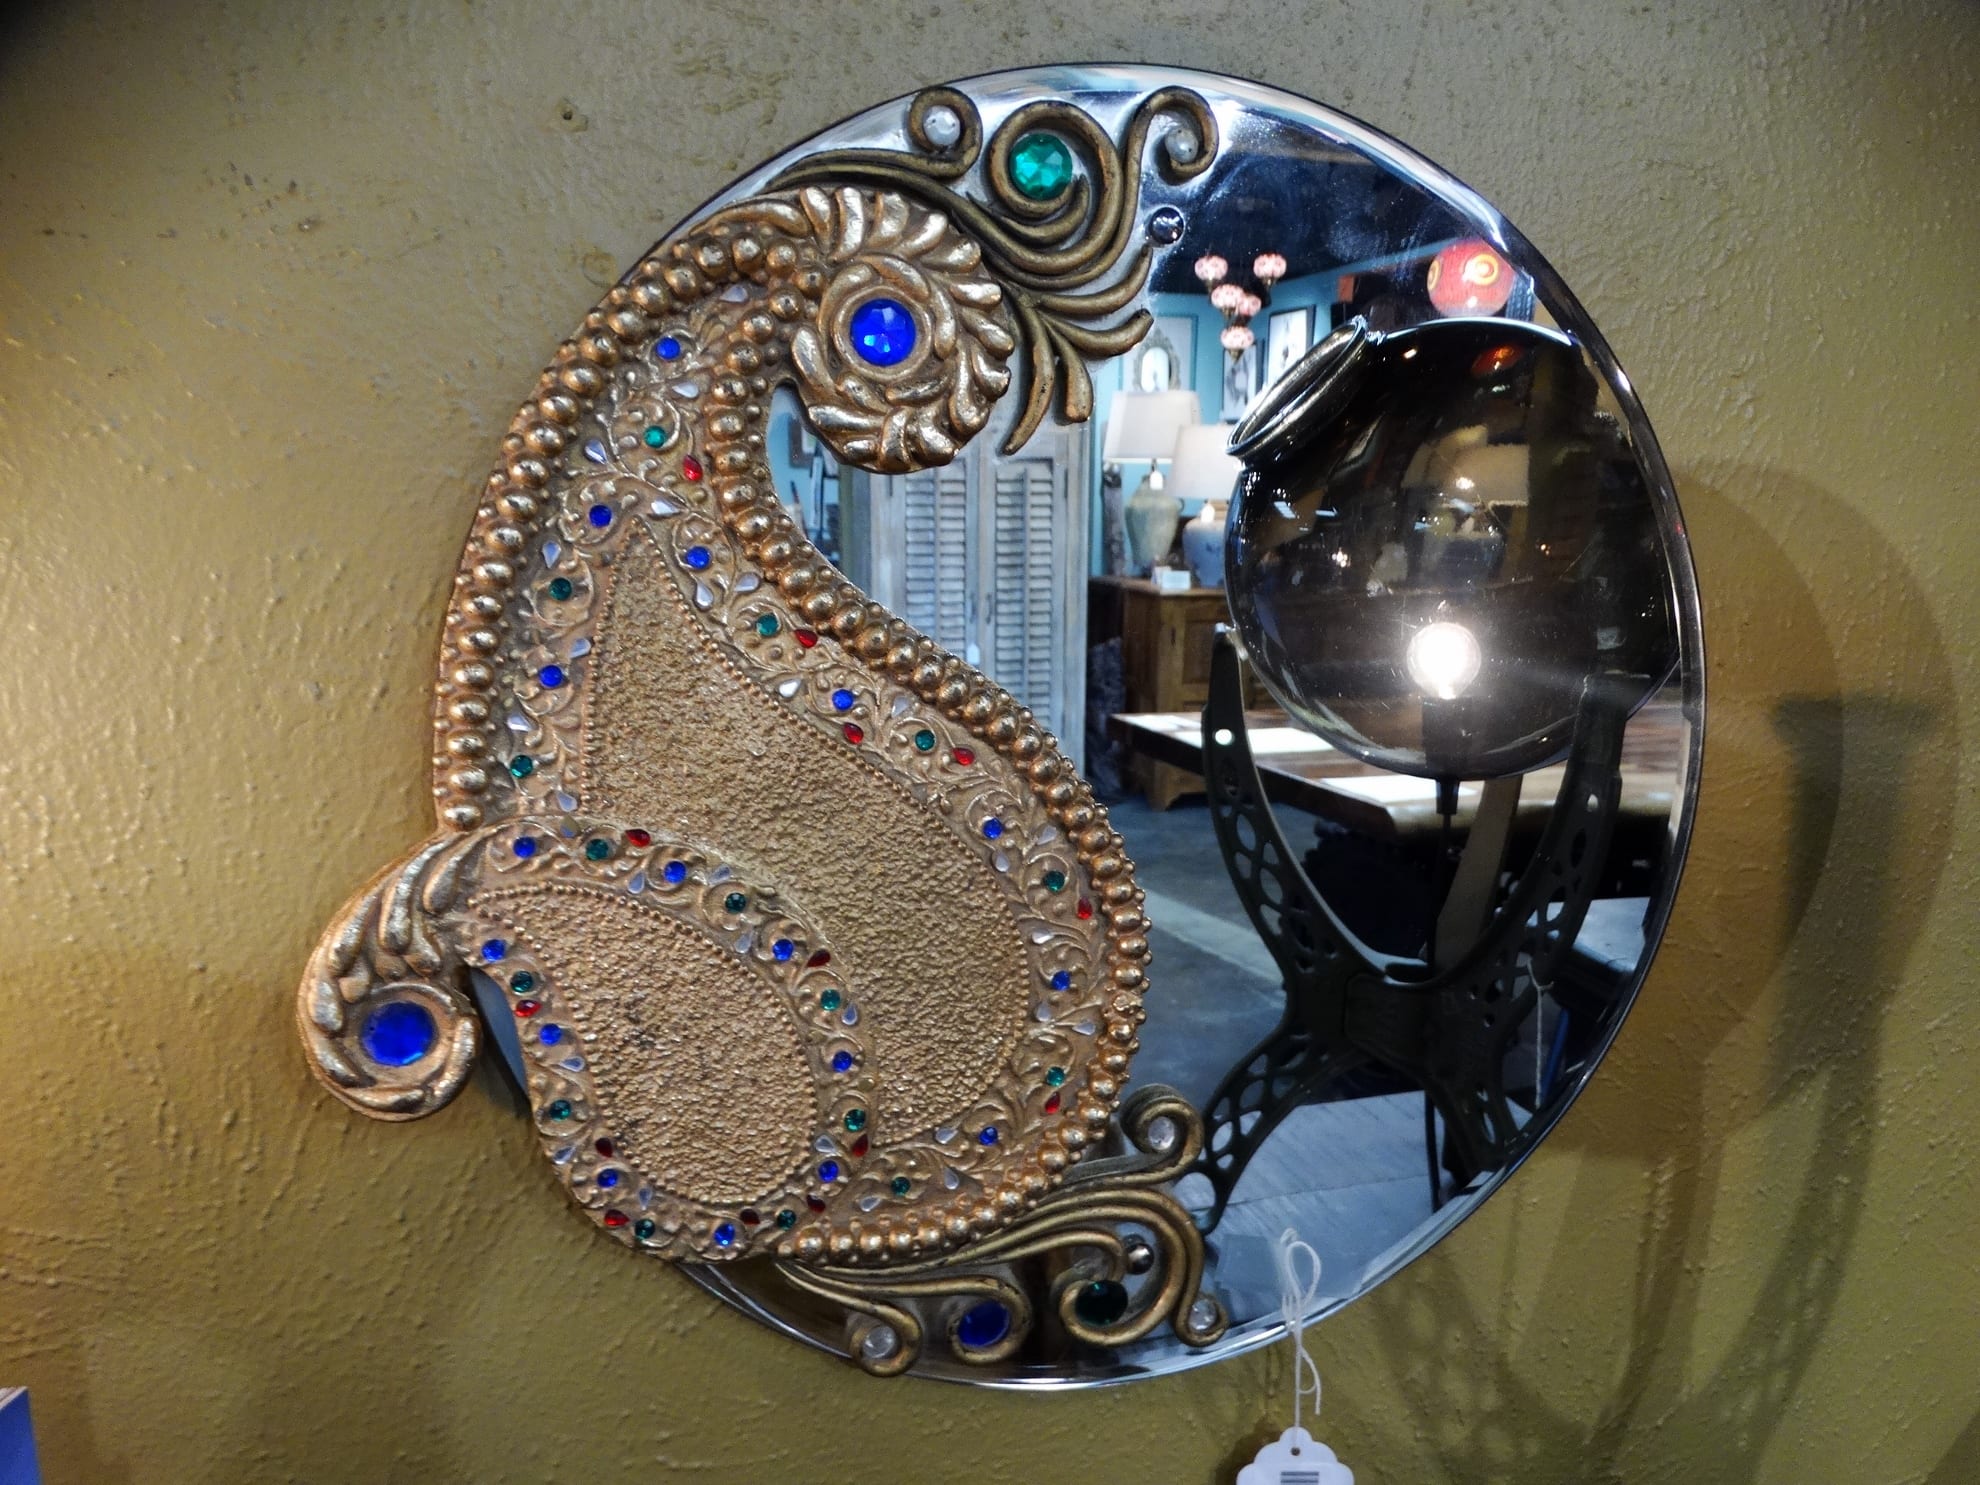 Round Fancy Bejeweled Paisley Mirror